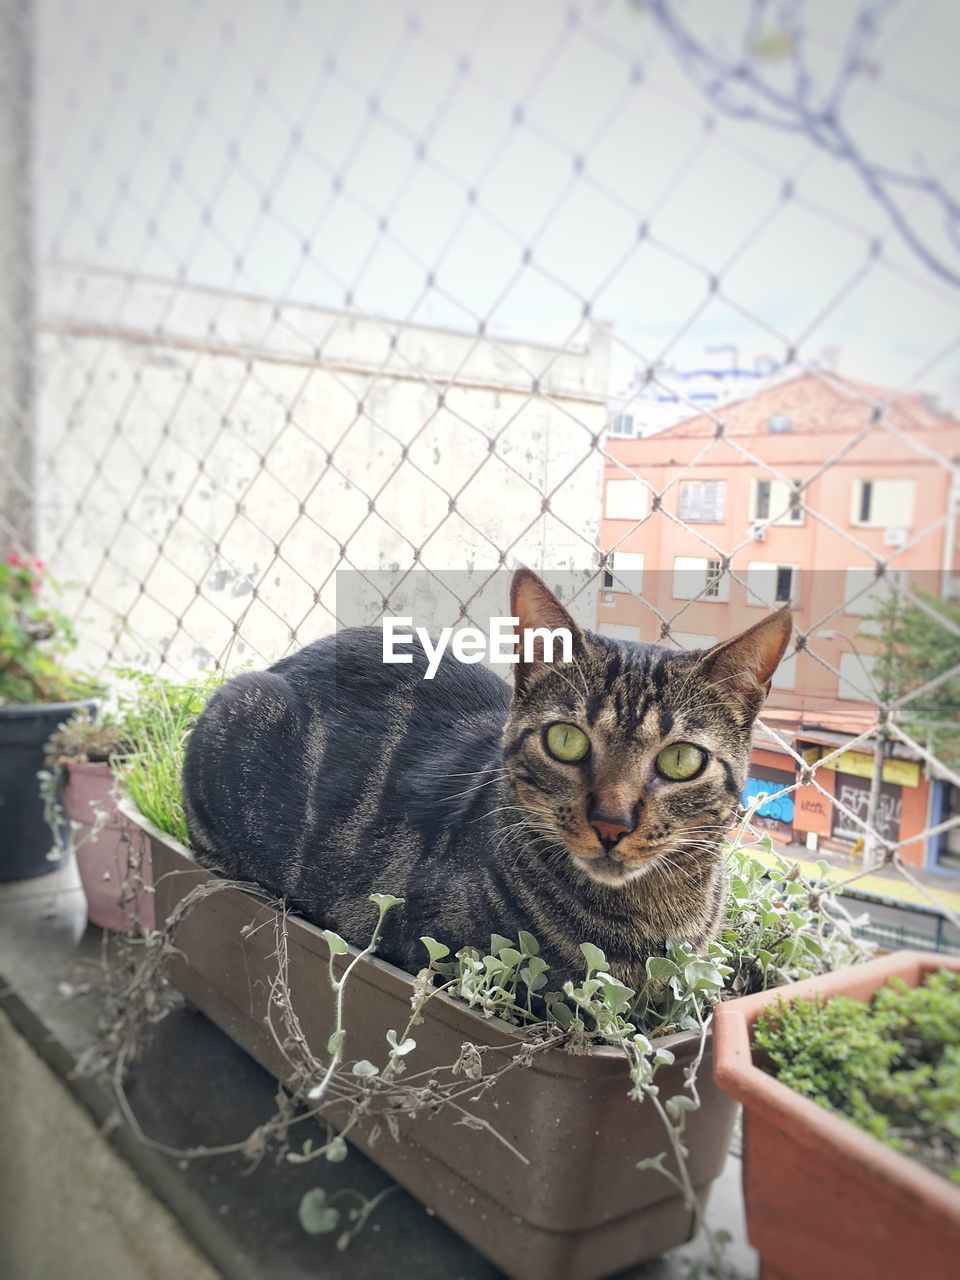 pet, domestic animals, mammal, animal, animal themes, cat, domestic cat, feline, one animal, portrait, looking at camera, potted plant, carnivore, houseplant, flowerpot, plant, small to medium-sized cats, day, no people, felidae, fence, nature, flower, sitting, outdoors, architecture